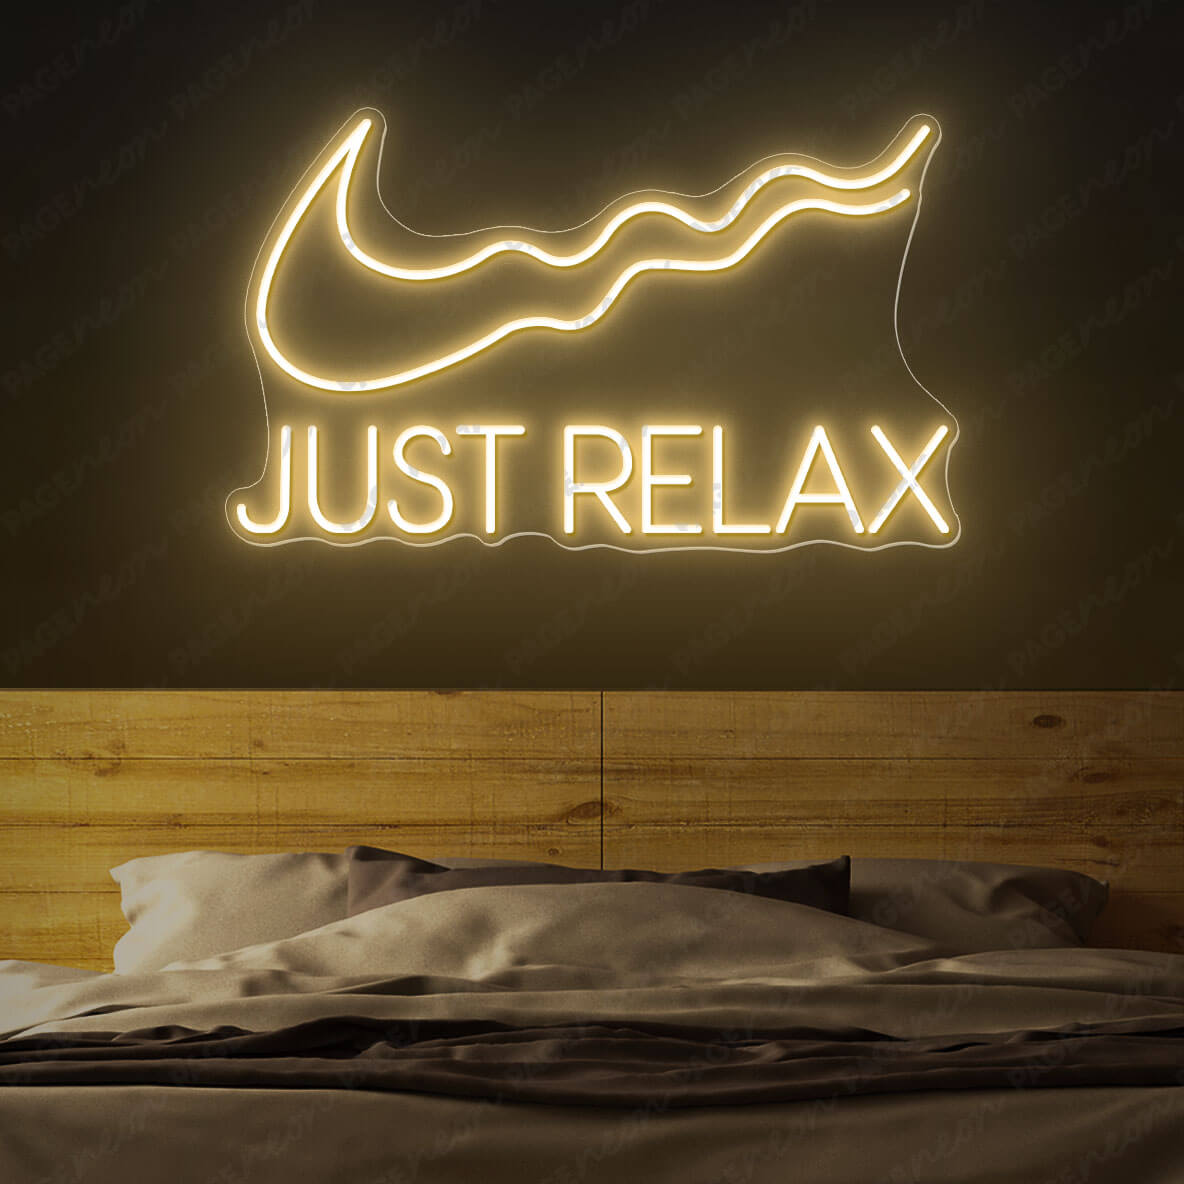 Just Relax Neon Sign Led Light Gold Yellow